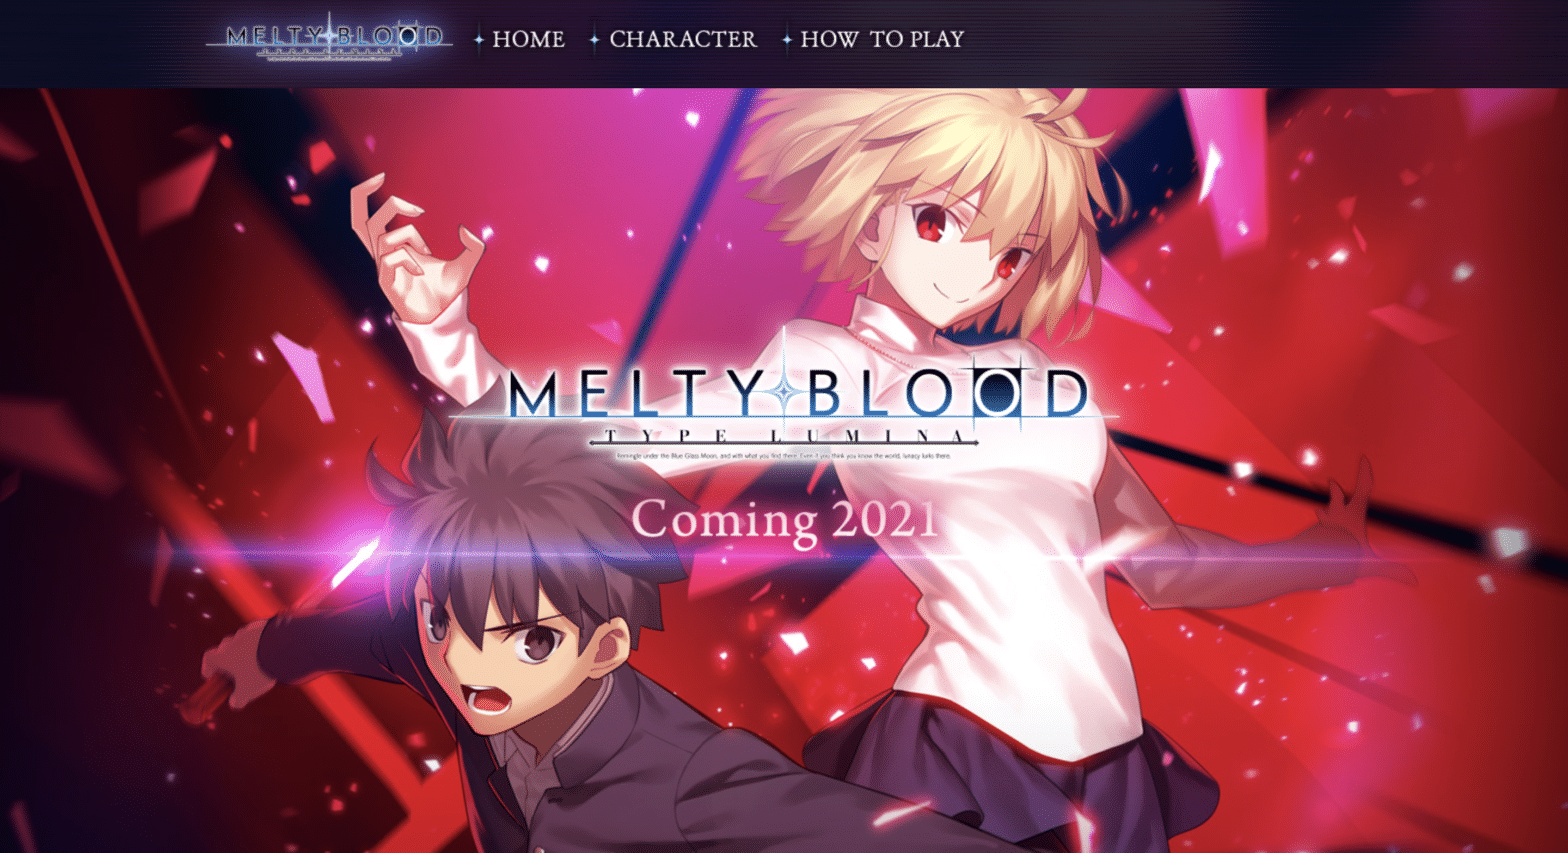 Created music and sound effects for MELTY BLOOD: TYPE LUMINA.